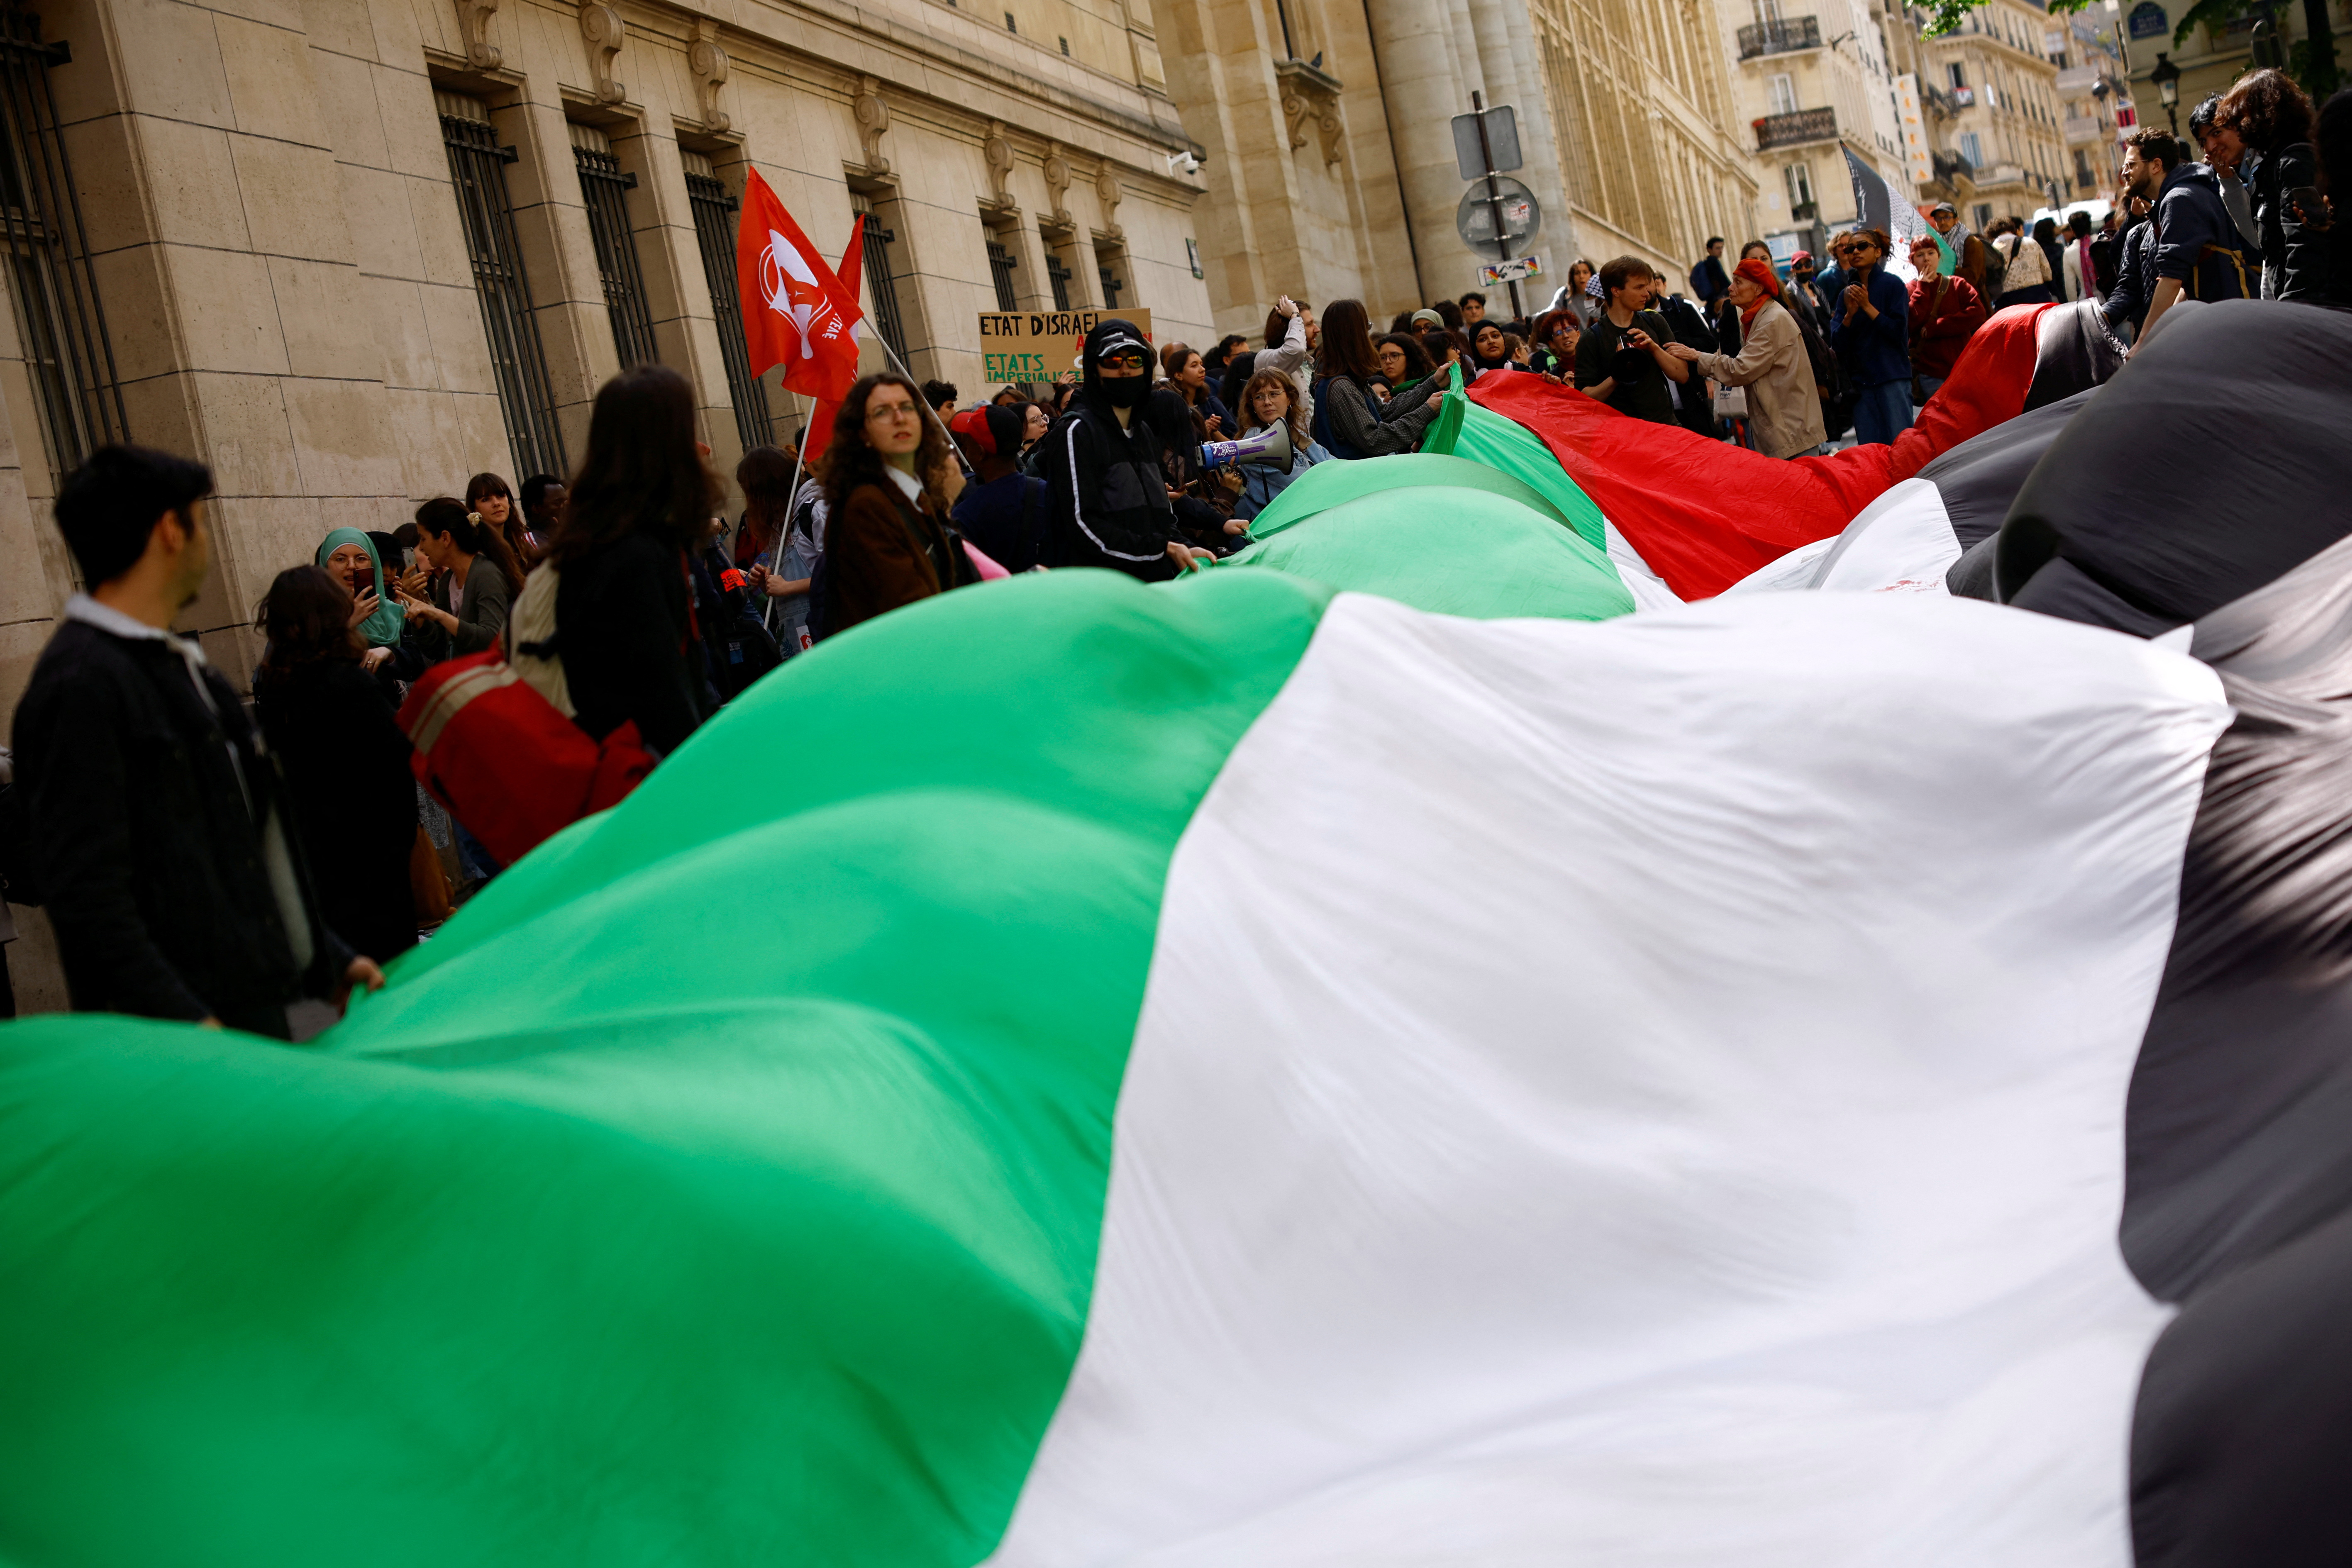 Students of the Sorbonne University gather to protest over Gaza war in Paris